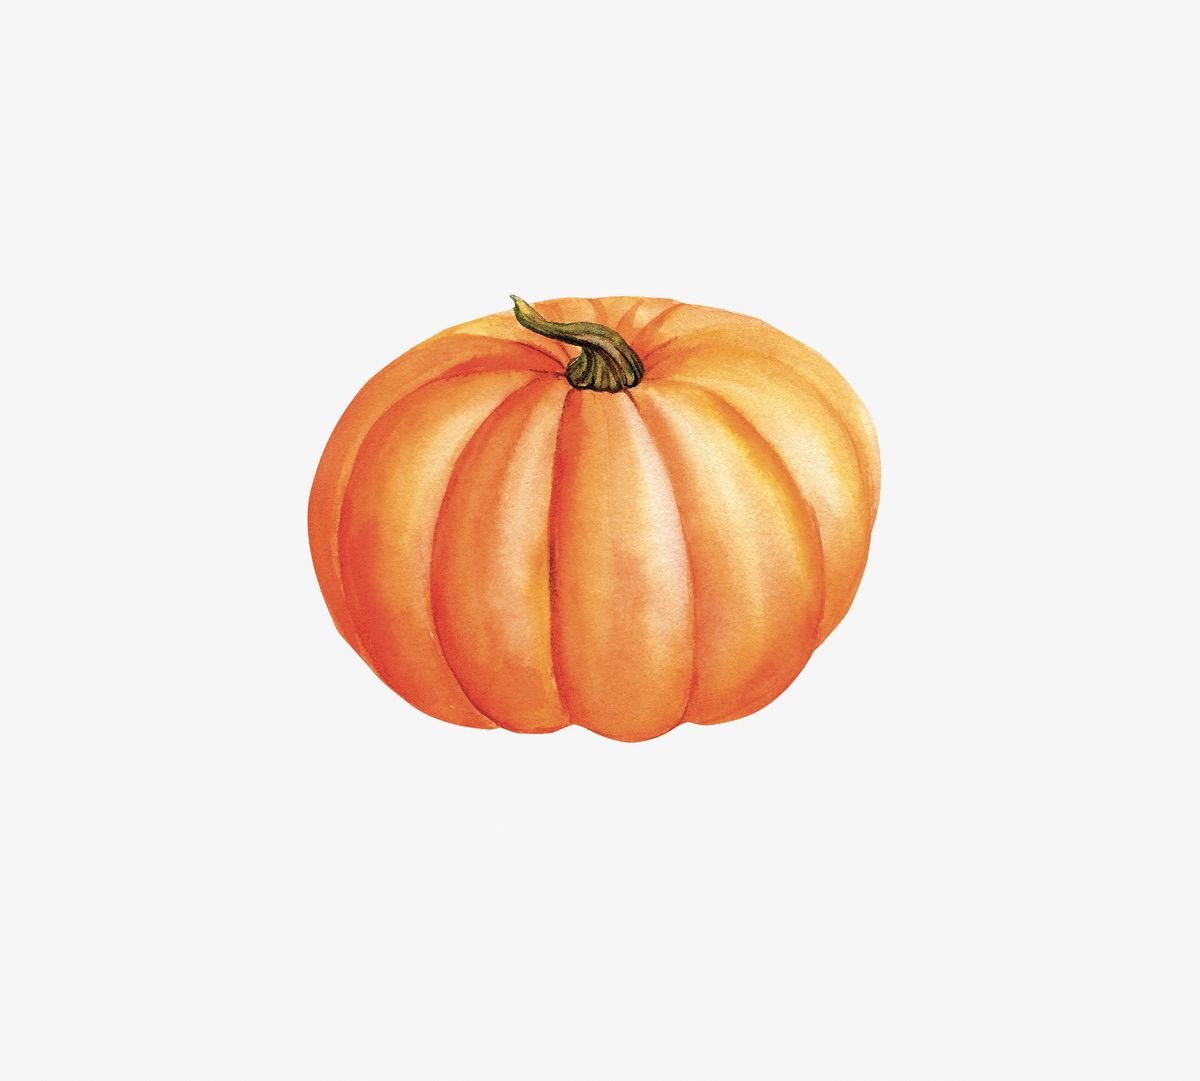 Illustration of a bright orange pumpkin with pronounced vertical ribs and a small green stem, surrounded by Cover-Alls Thanksgiving Cornucopia Decals, isolated on a white background.